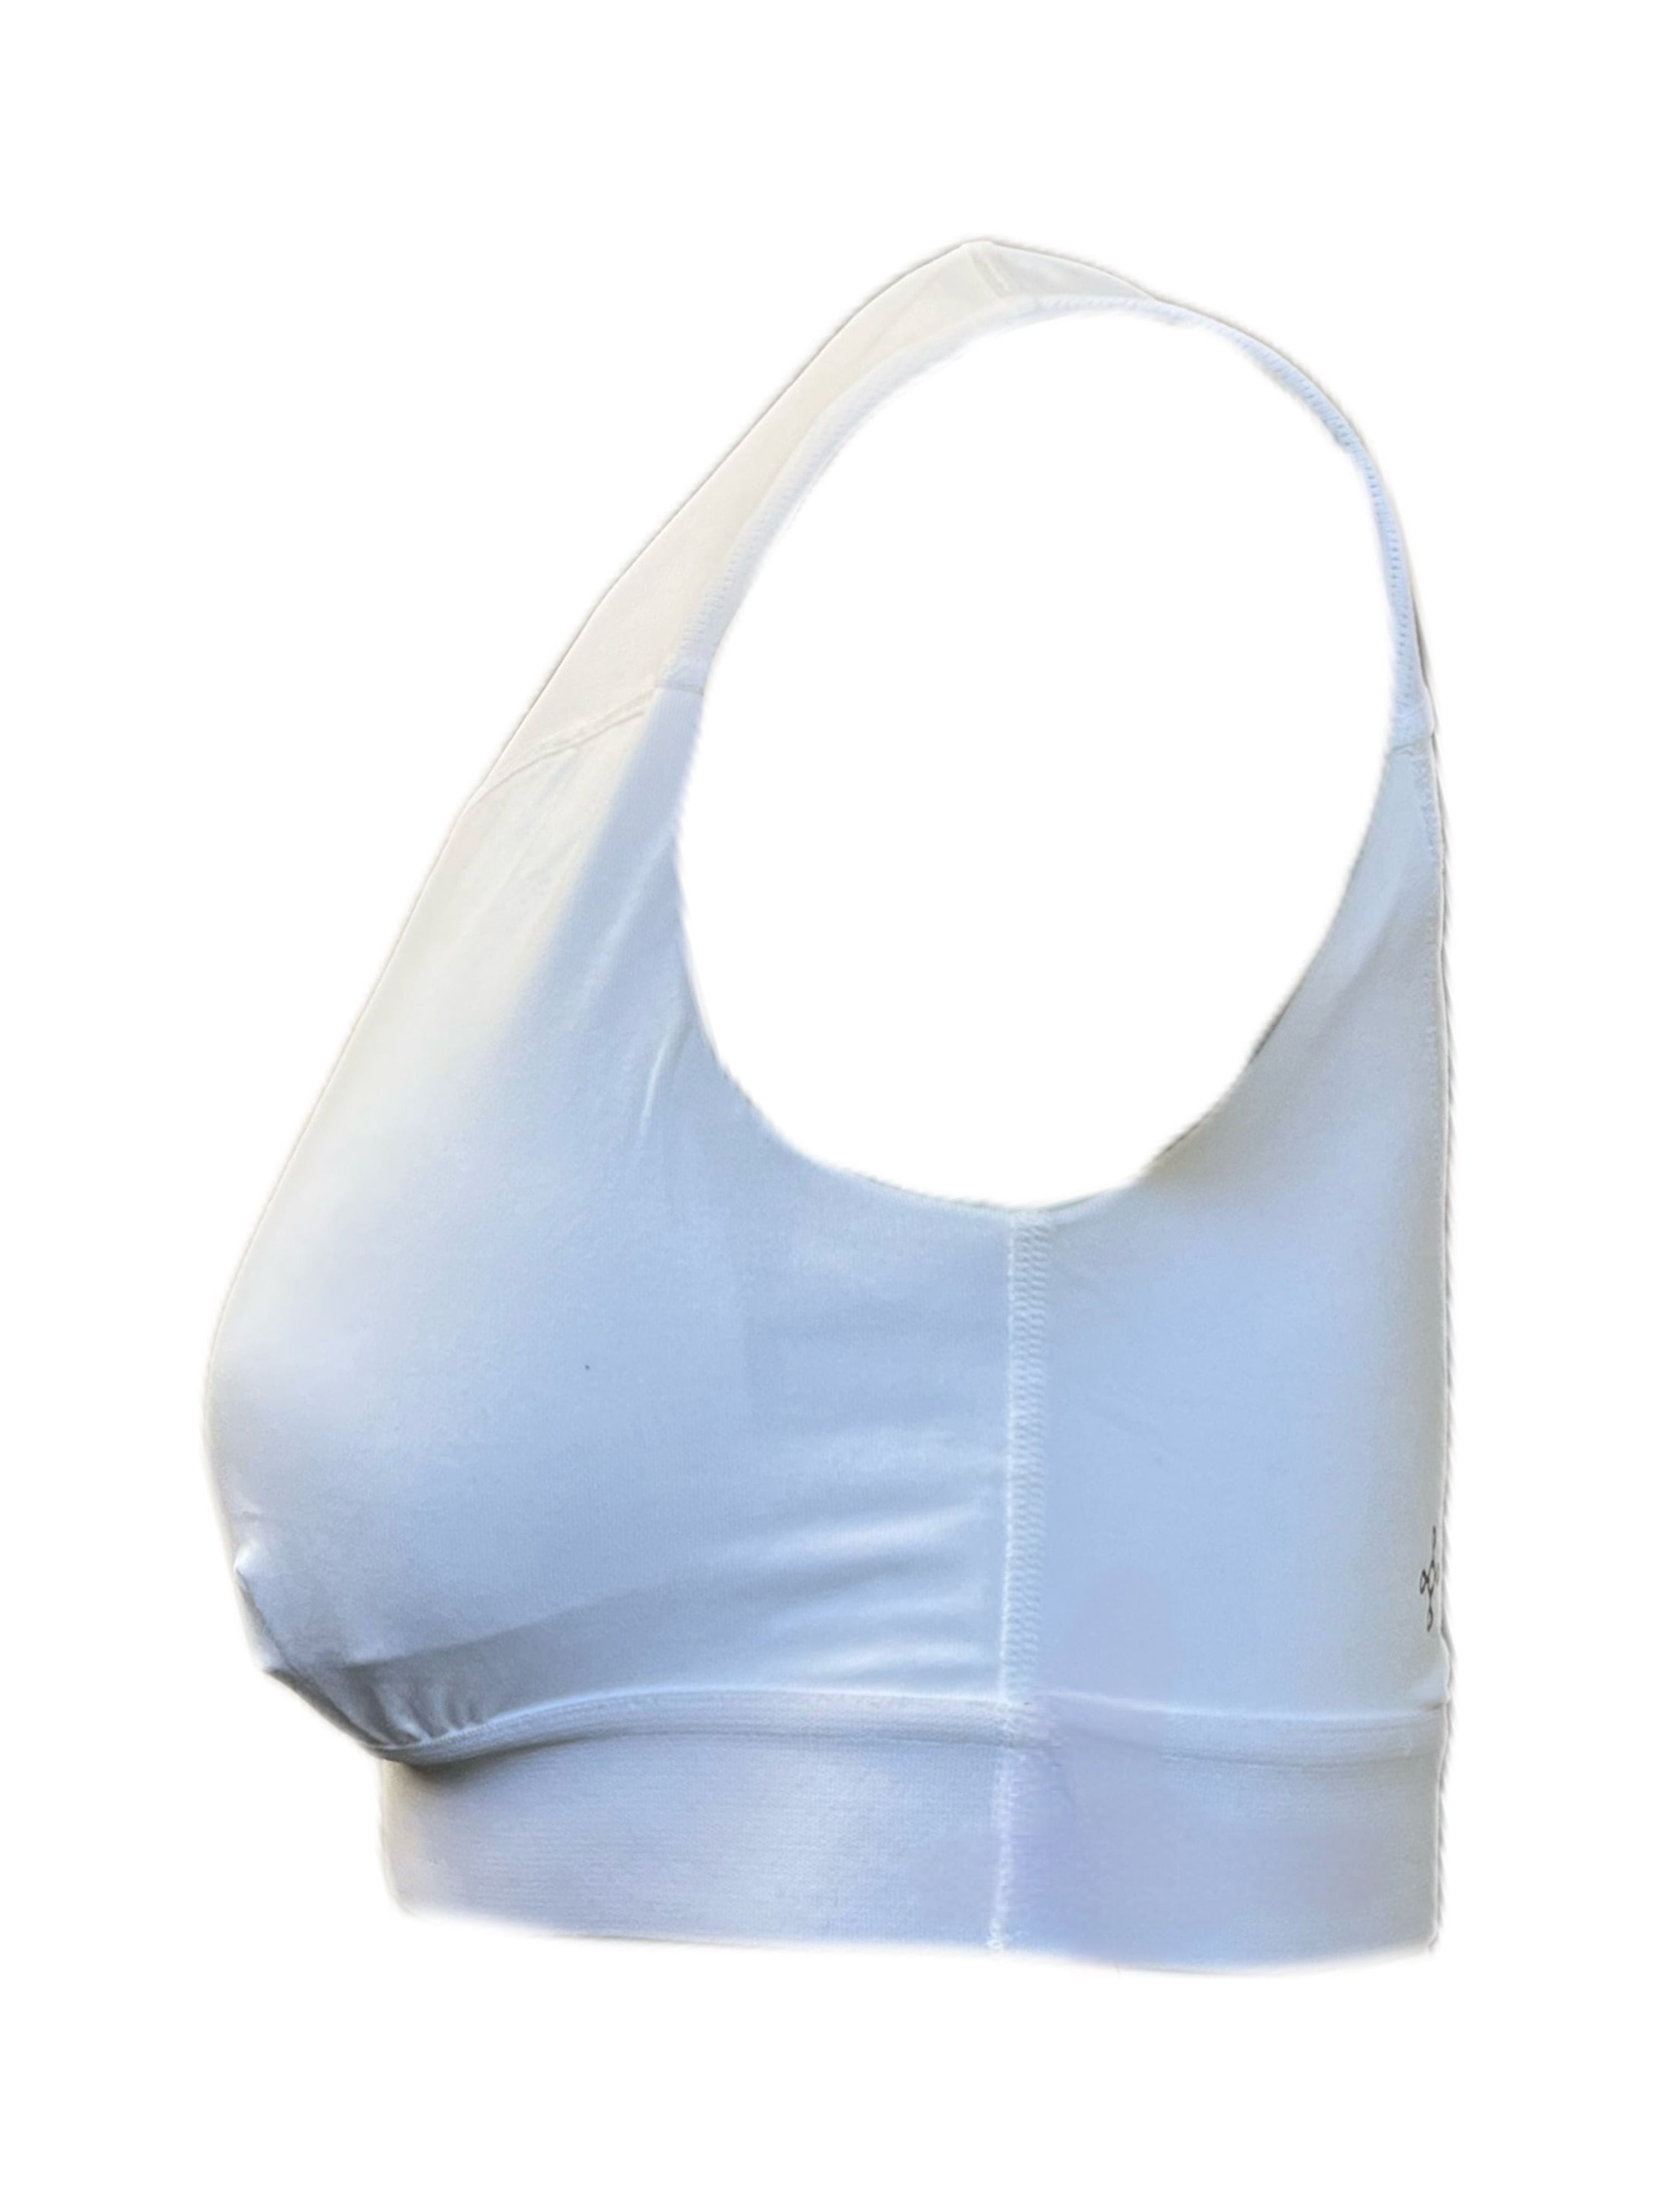 TOMMIE COPPER Womens White Shoulder Support Comfort Bra, X